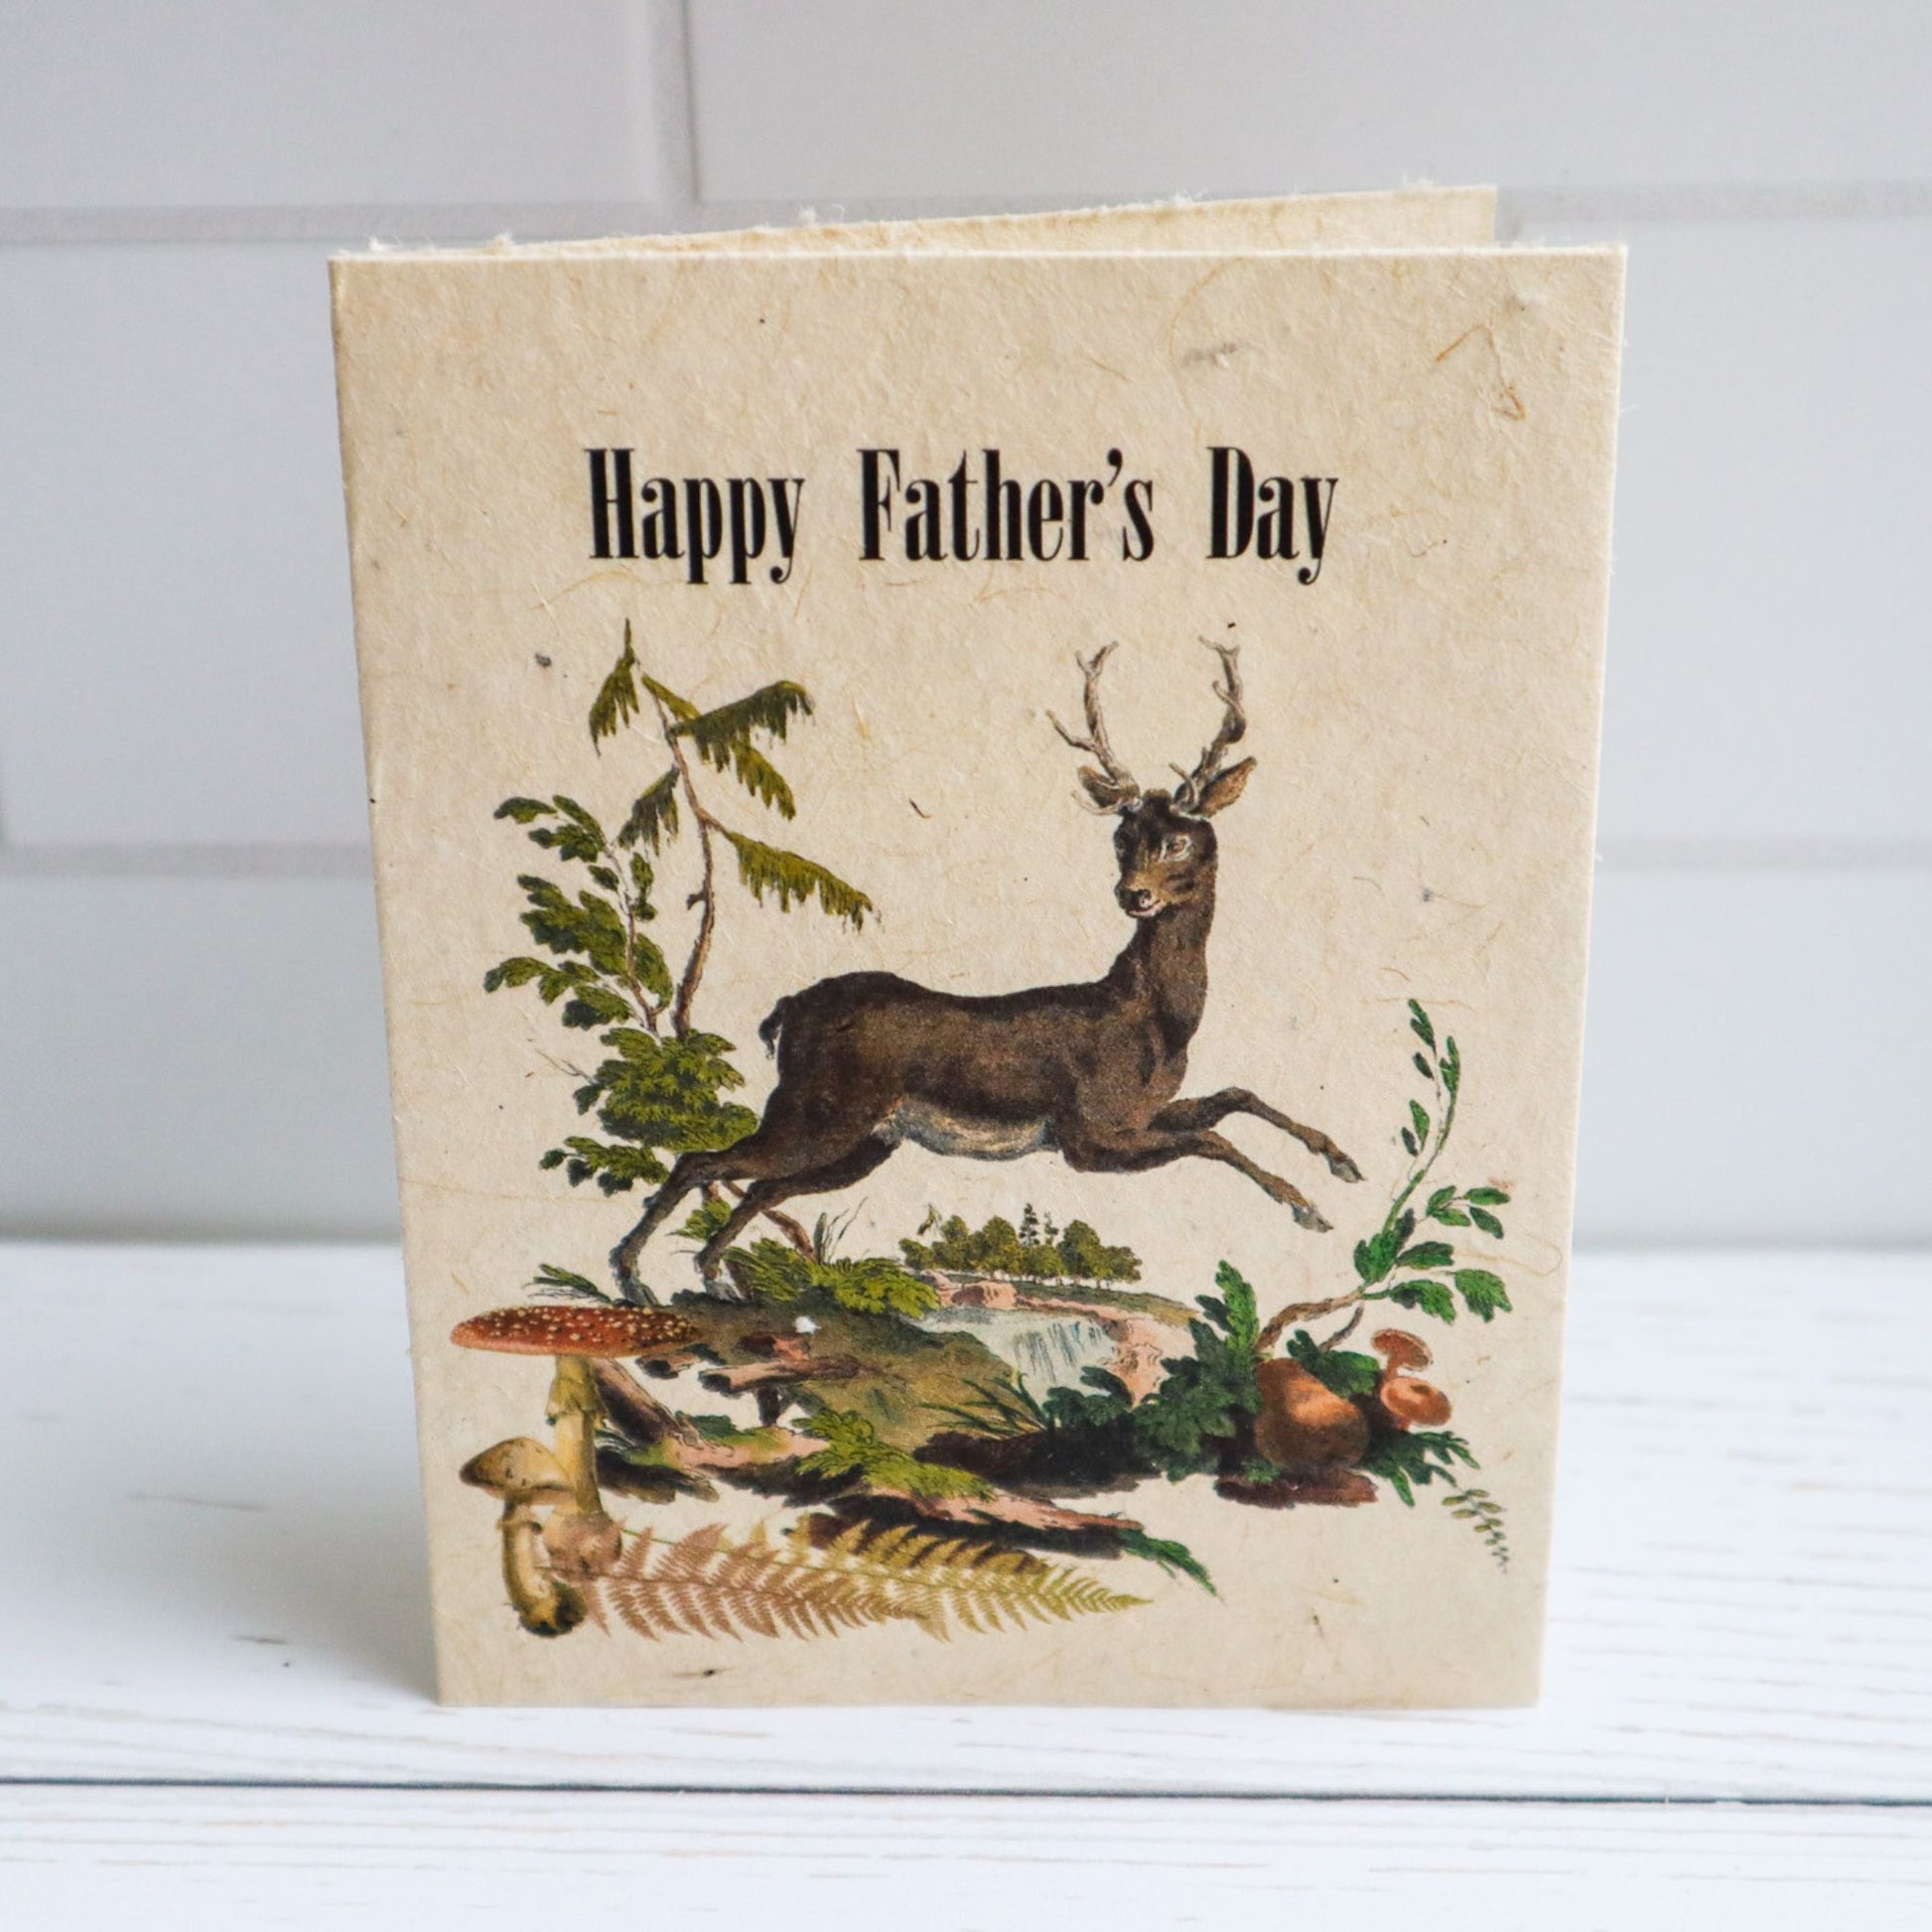 Happy Father's Day plantable flower seed paper card by Helen Jeanne Handmade with deer jumping, mushrooms, and river landscape